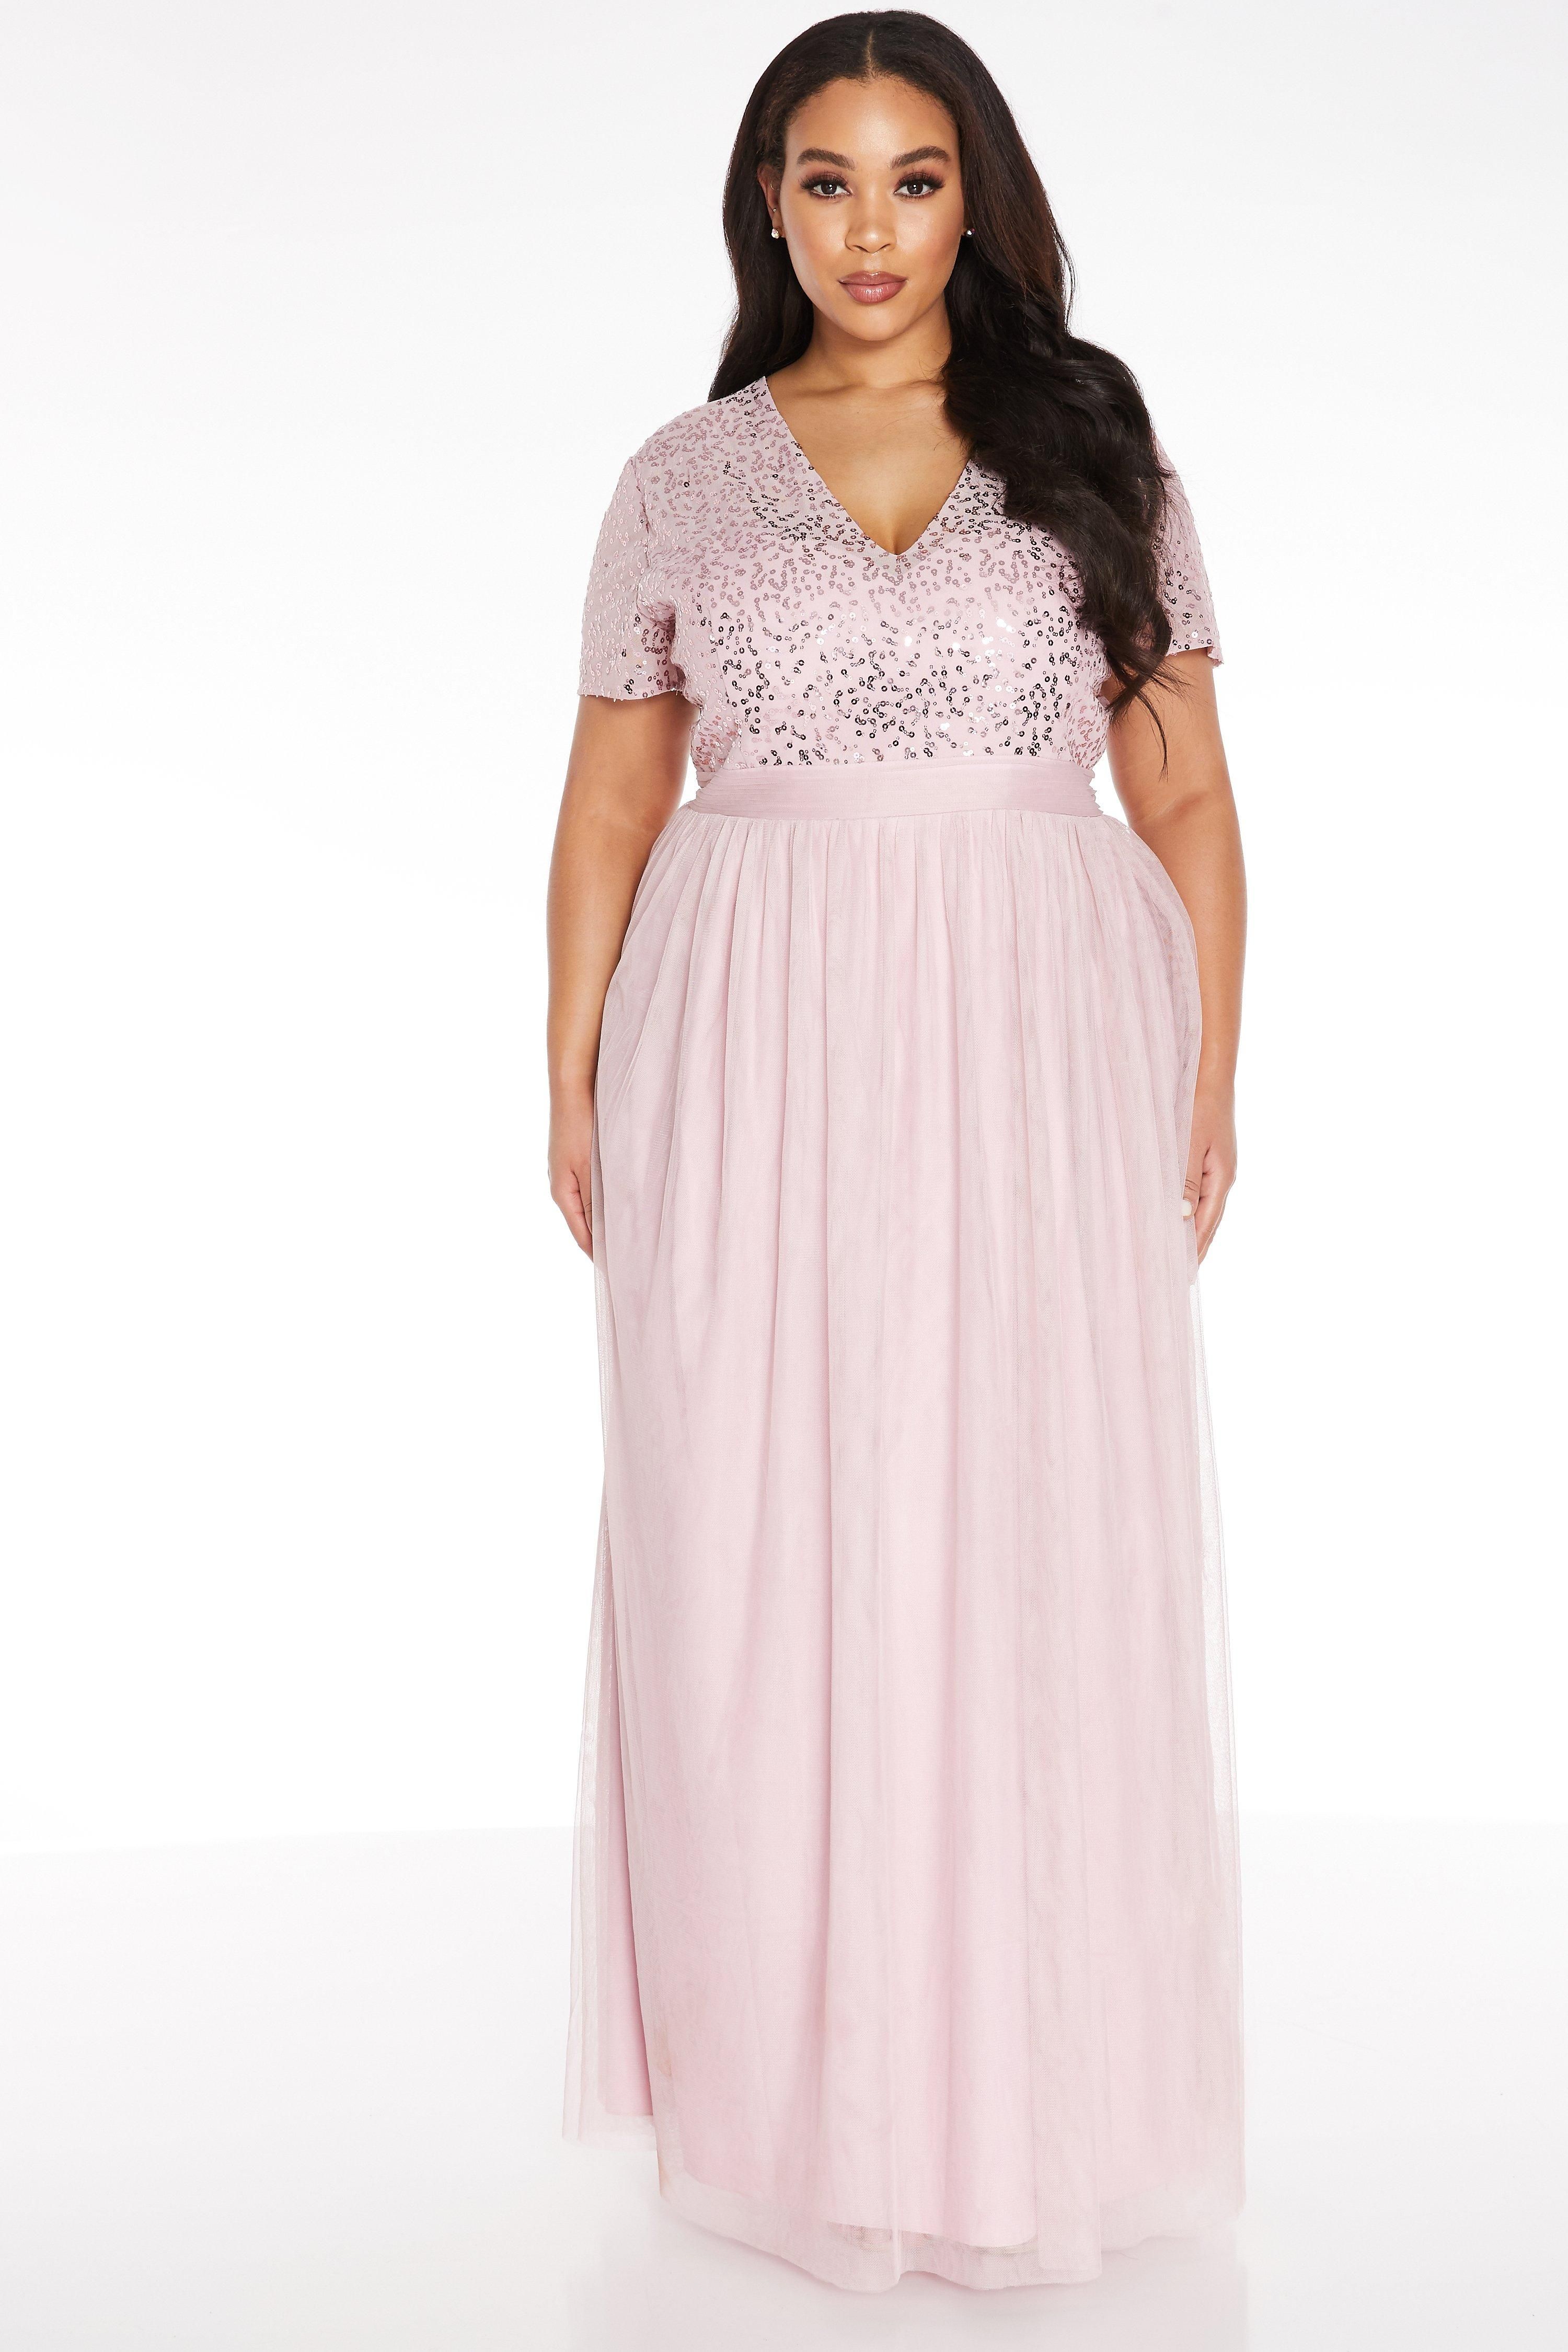 - Curve collection  - Perfect occasion dress  - Stretch back  - V neck  - Mesh sequin bodice  - 97% Polyester 3% Elastane  - 100% Polyester  - Model Height: 5' 8